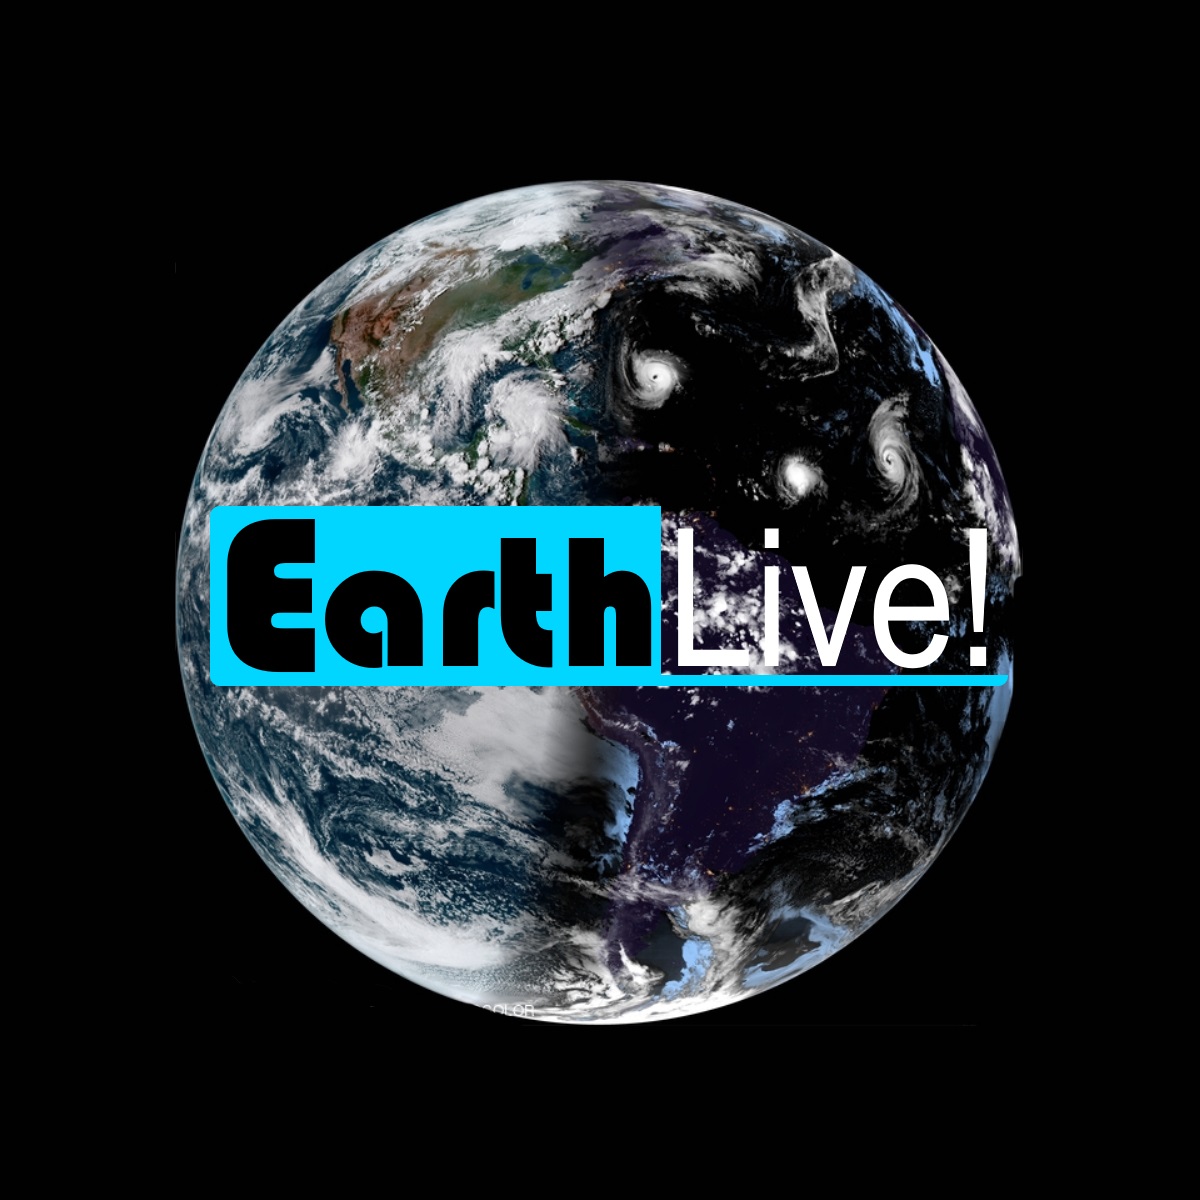 the living earth